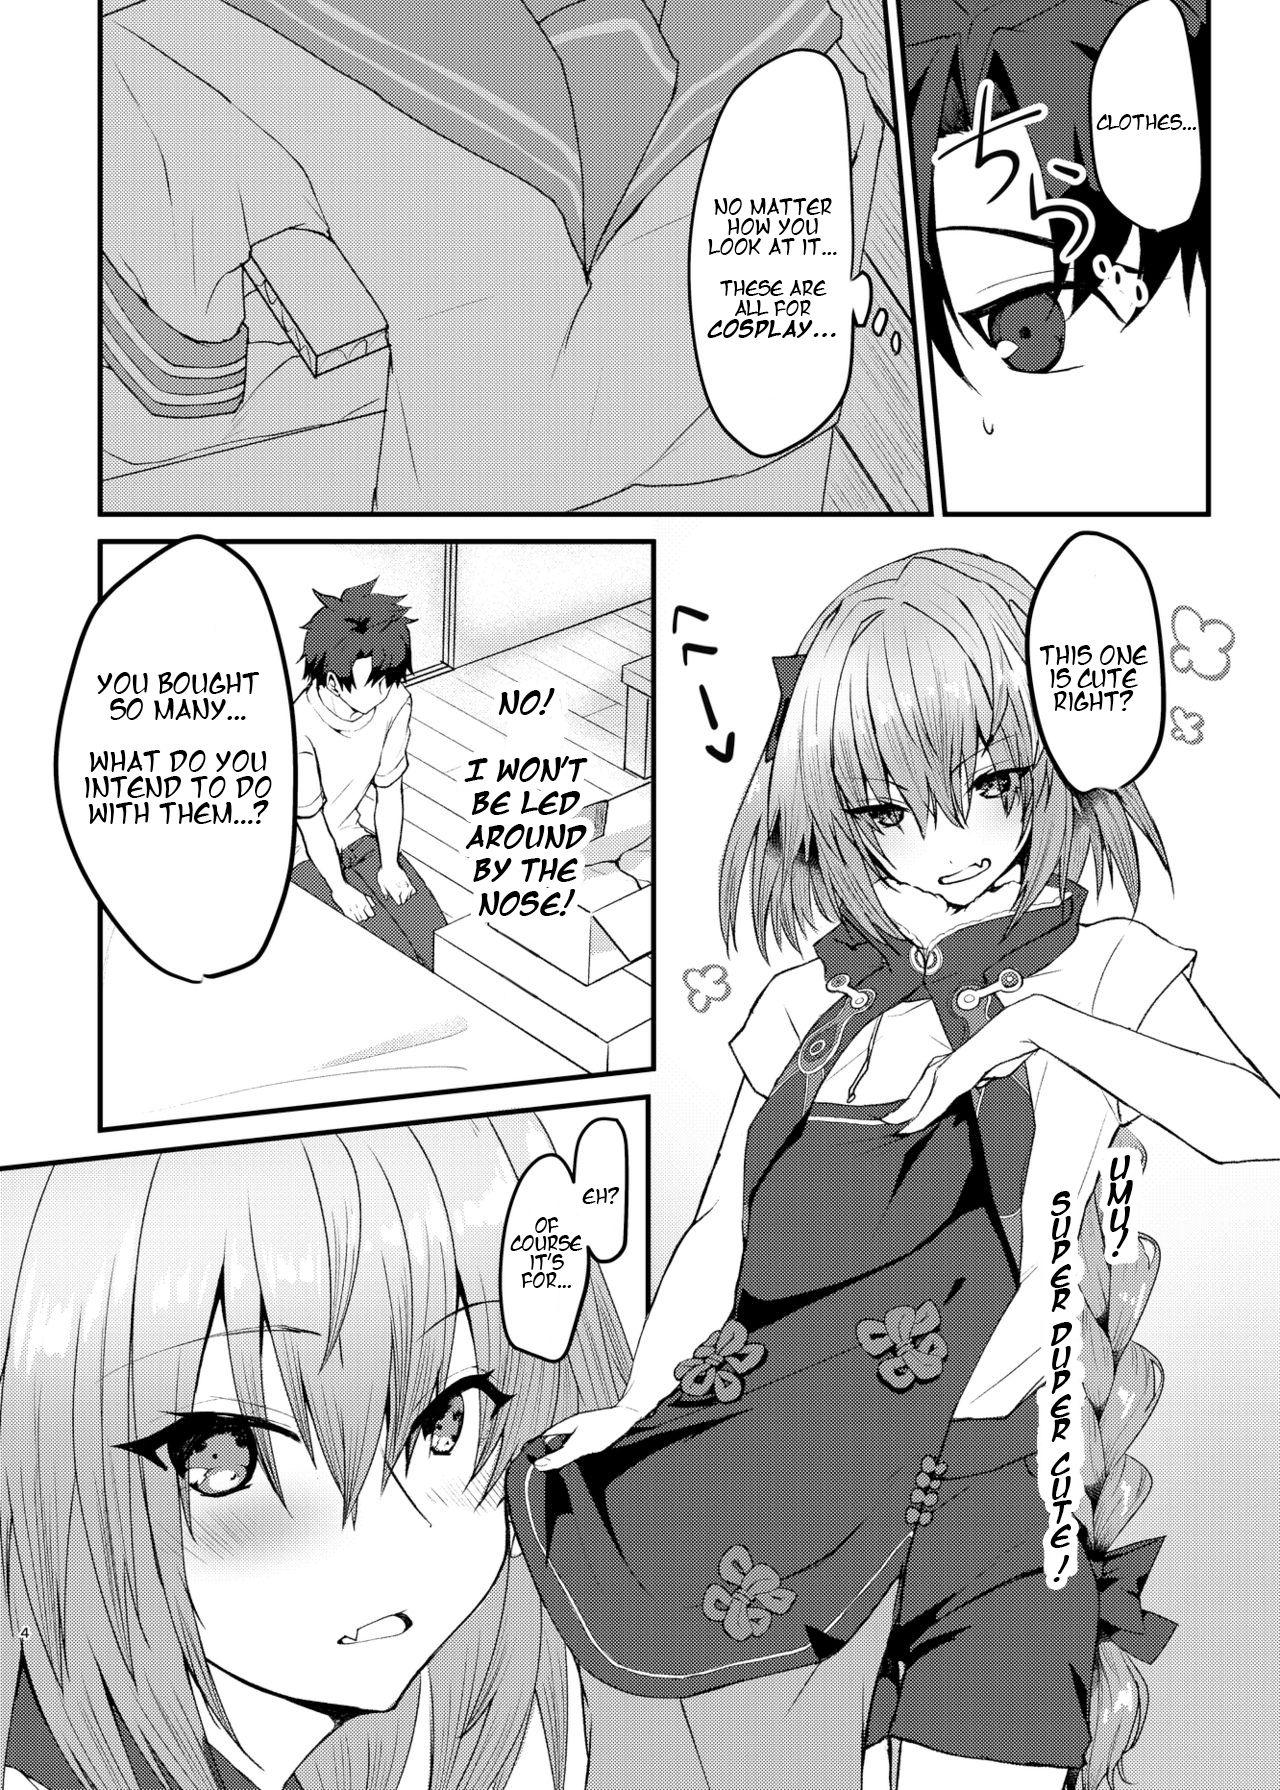 Fetish Astolfo-kun to Cosplay H suru Hon | Cosplay H with Astolfo - Fate grand order Staxxx - Page 4